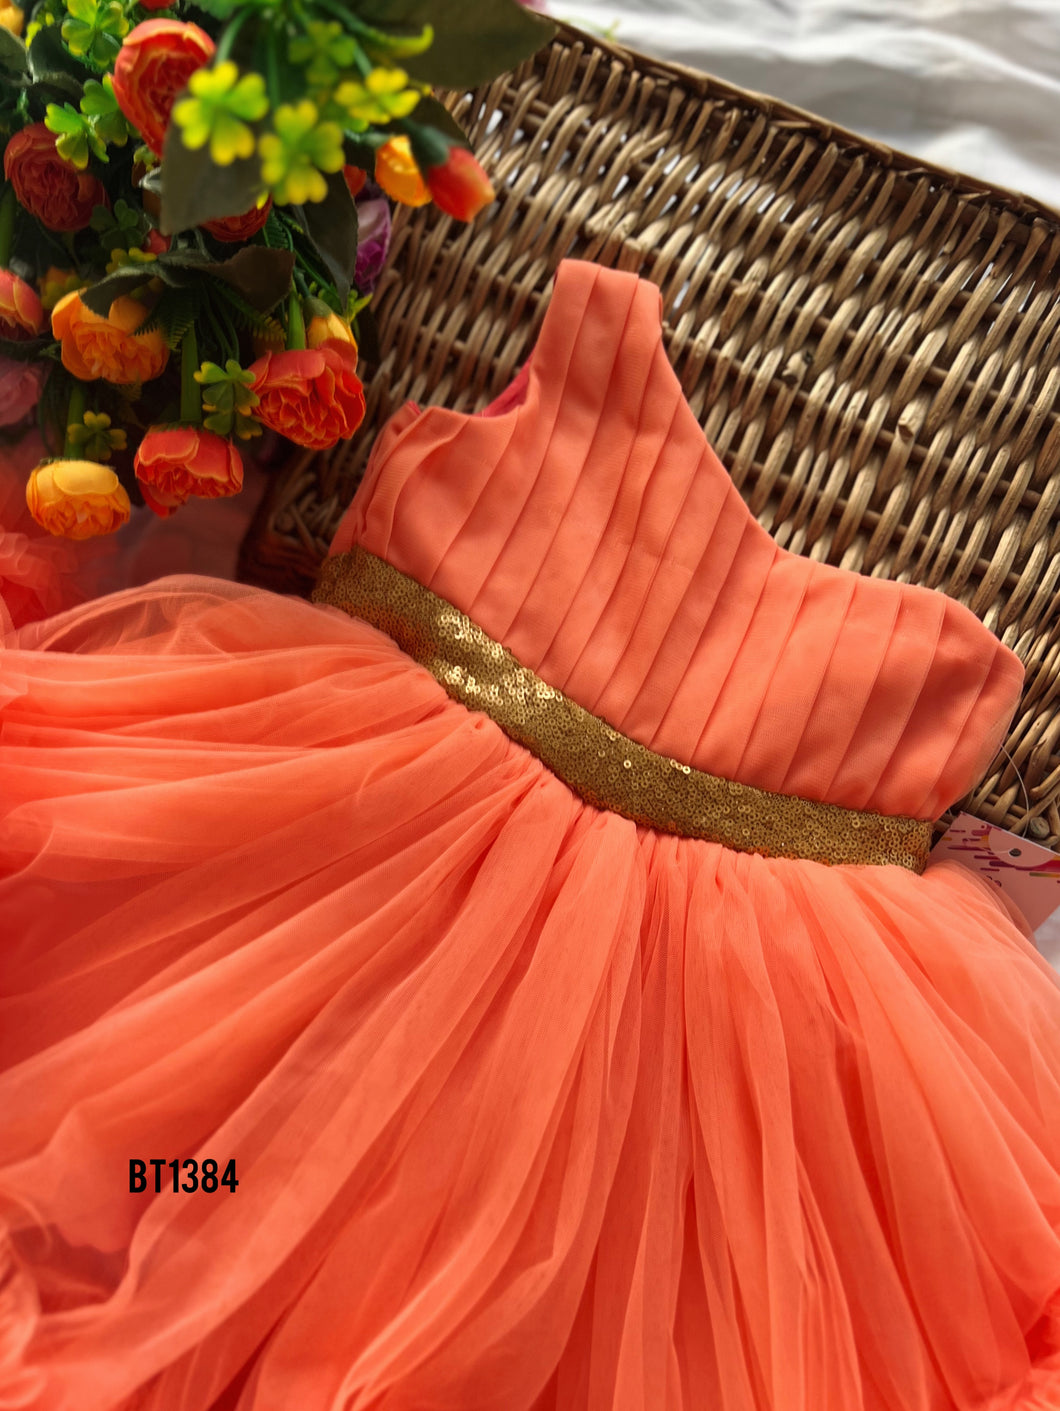 BT1384 Heavy Ruffled and Bouncy Frock